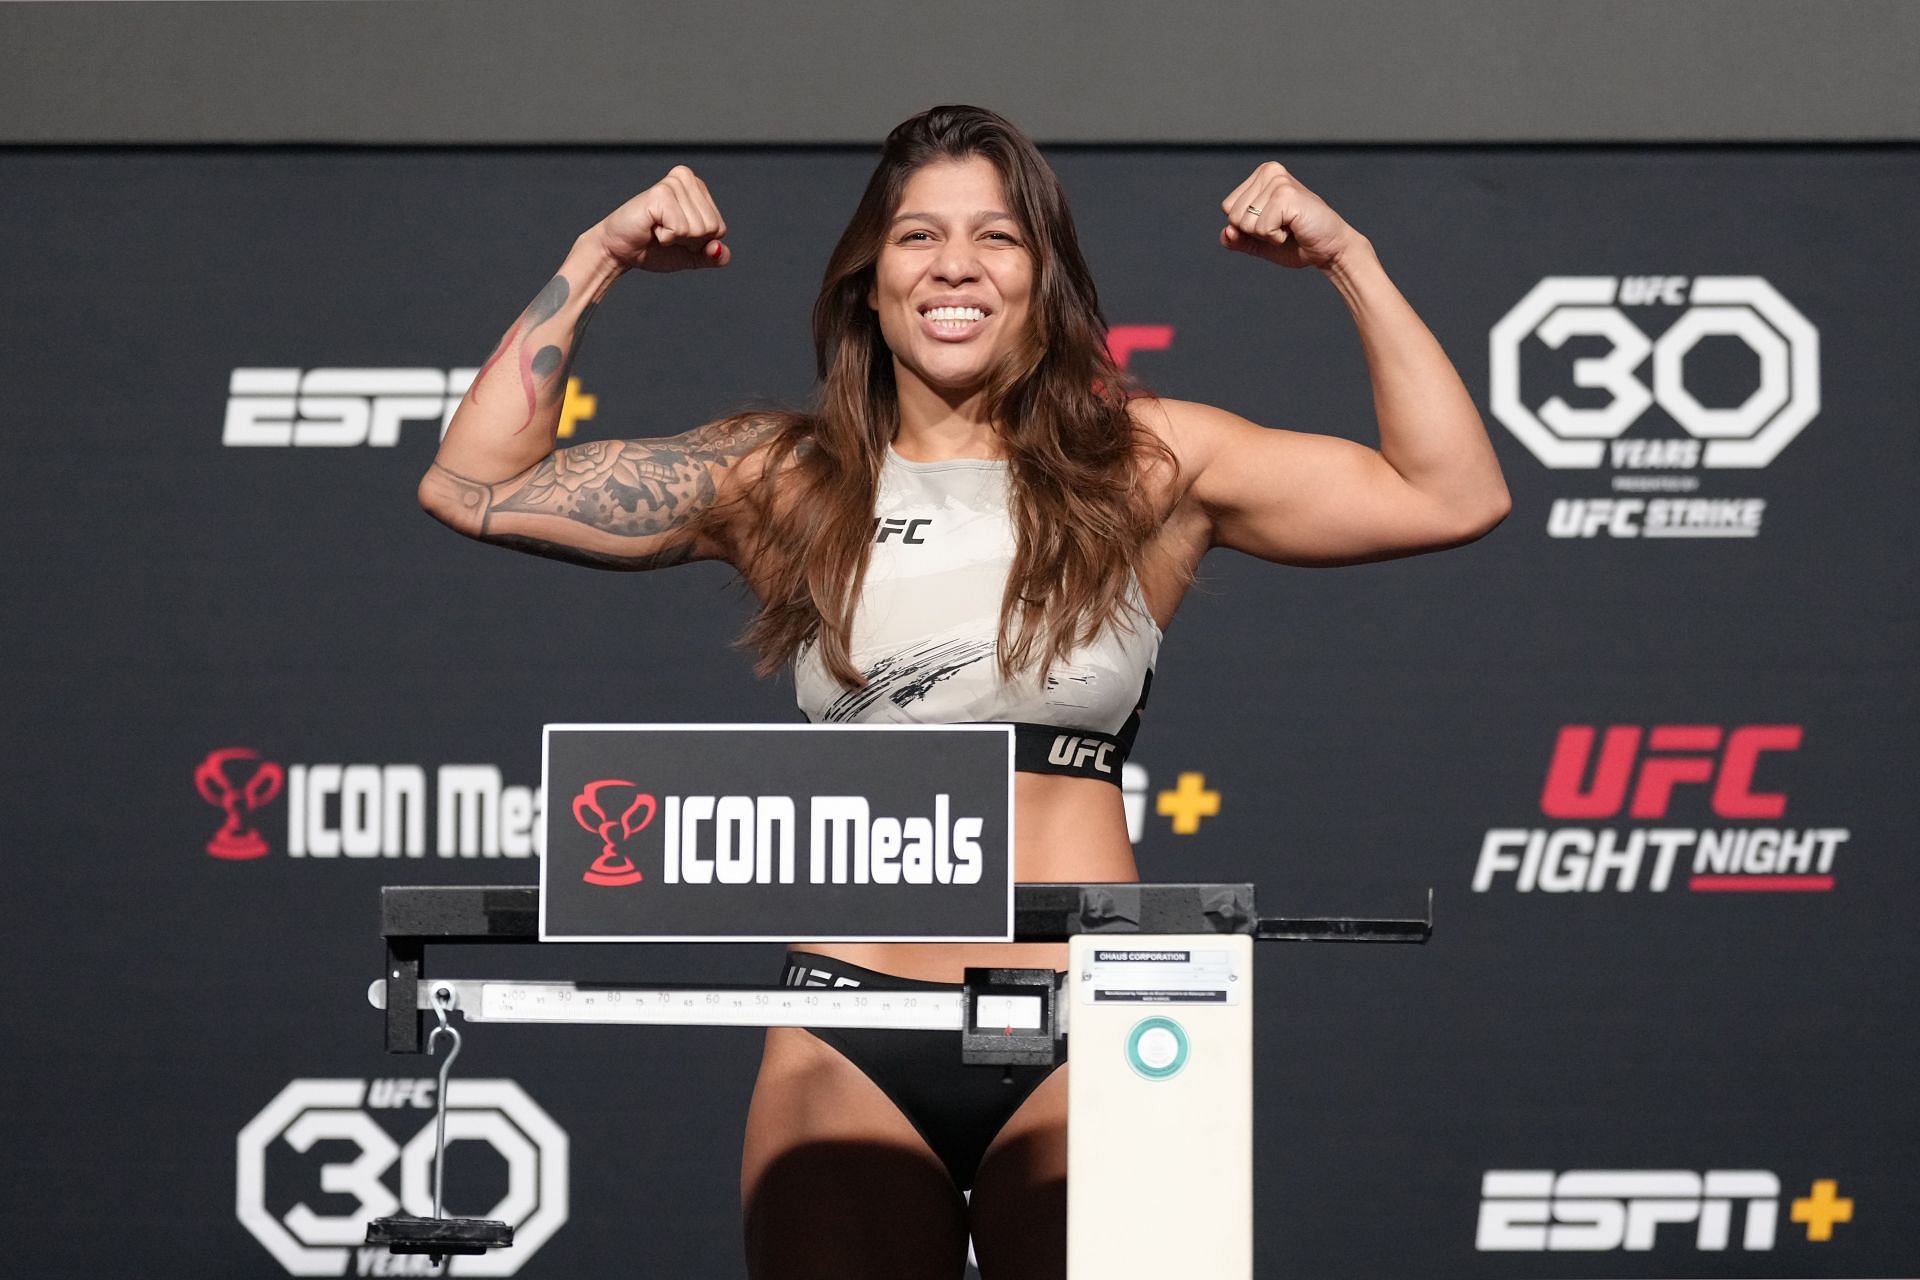 Mayra Bueno Silva may be in line for a title shot after her win last night